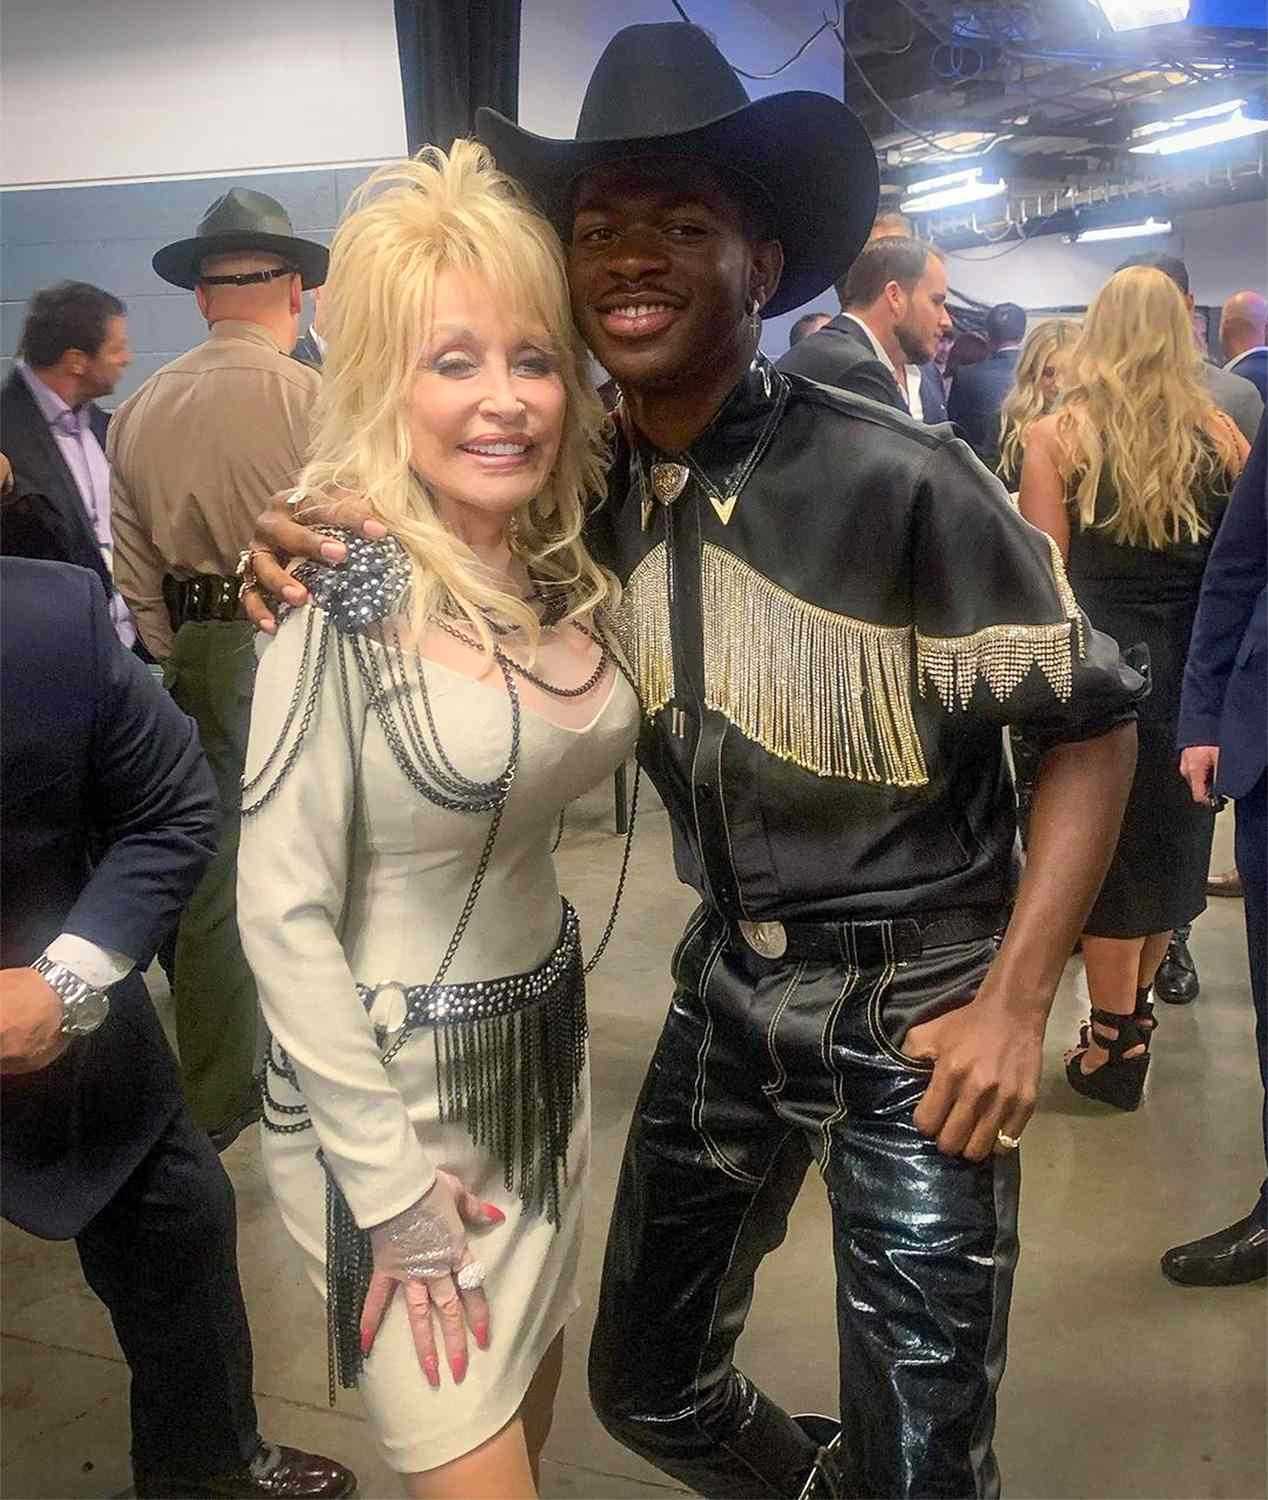 Dolly Parton’s approved Jolene cover by Lil Nas X reignited country legacy